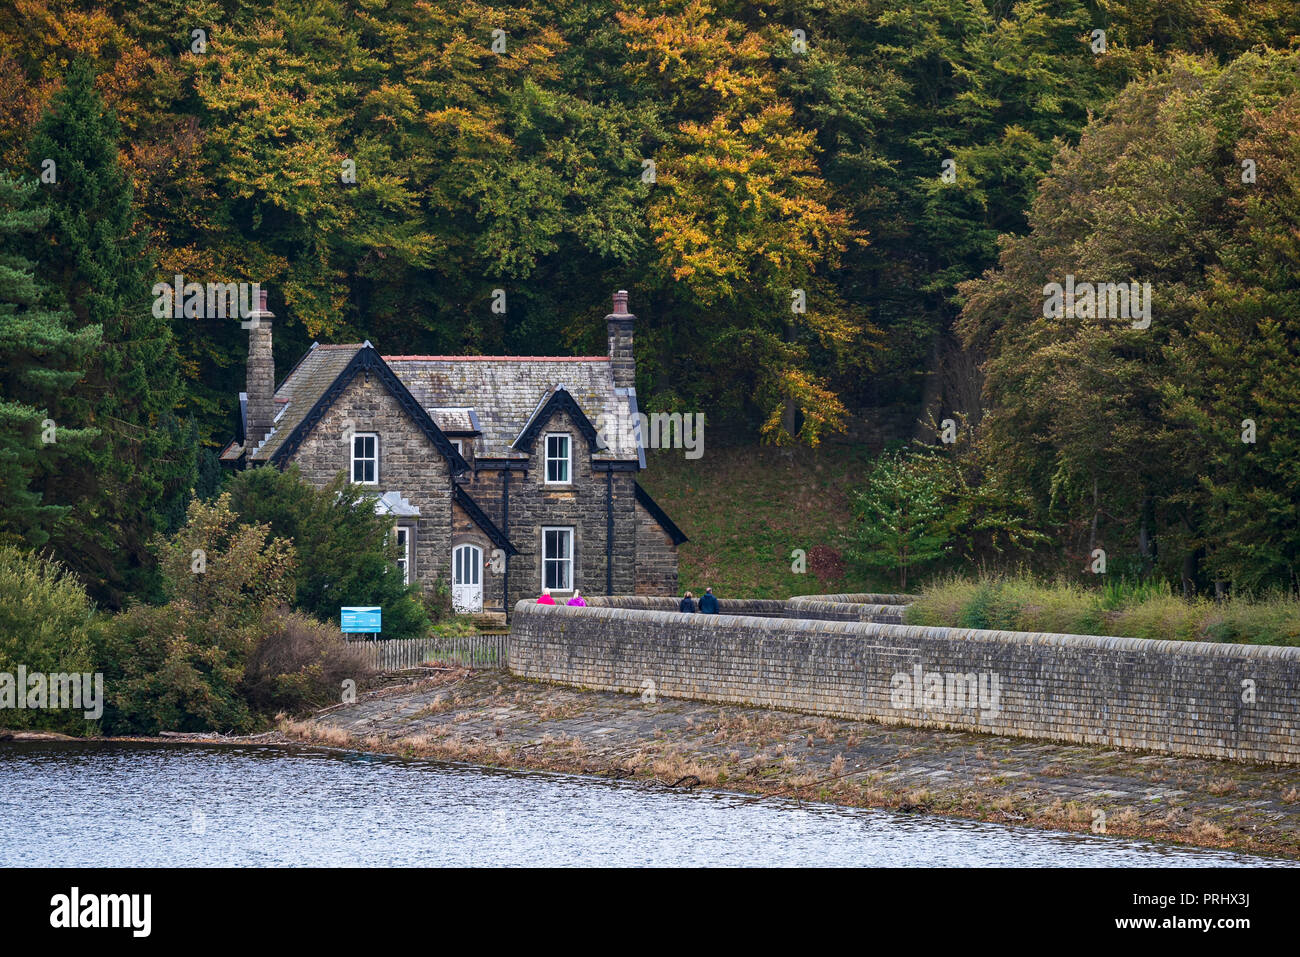 Stone-built house standing at woodland edge, by embankment wall & on shore of lake - Fewston Reservoir, Washburn Valley, North Yorkshire, England, UK. Stock Photo